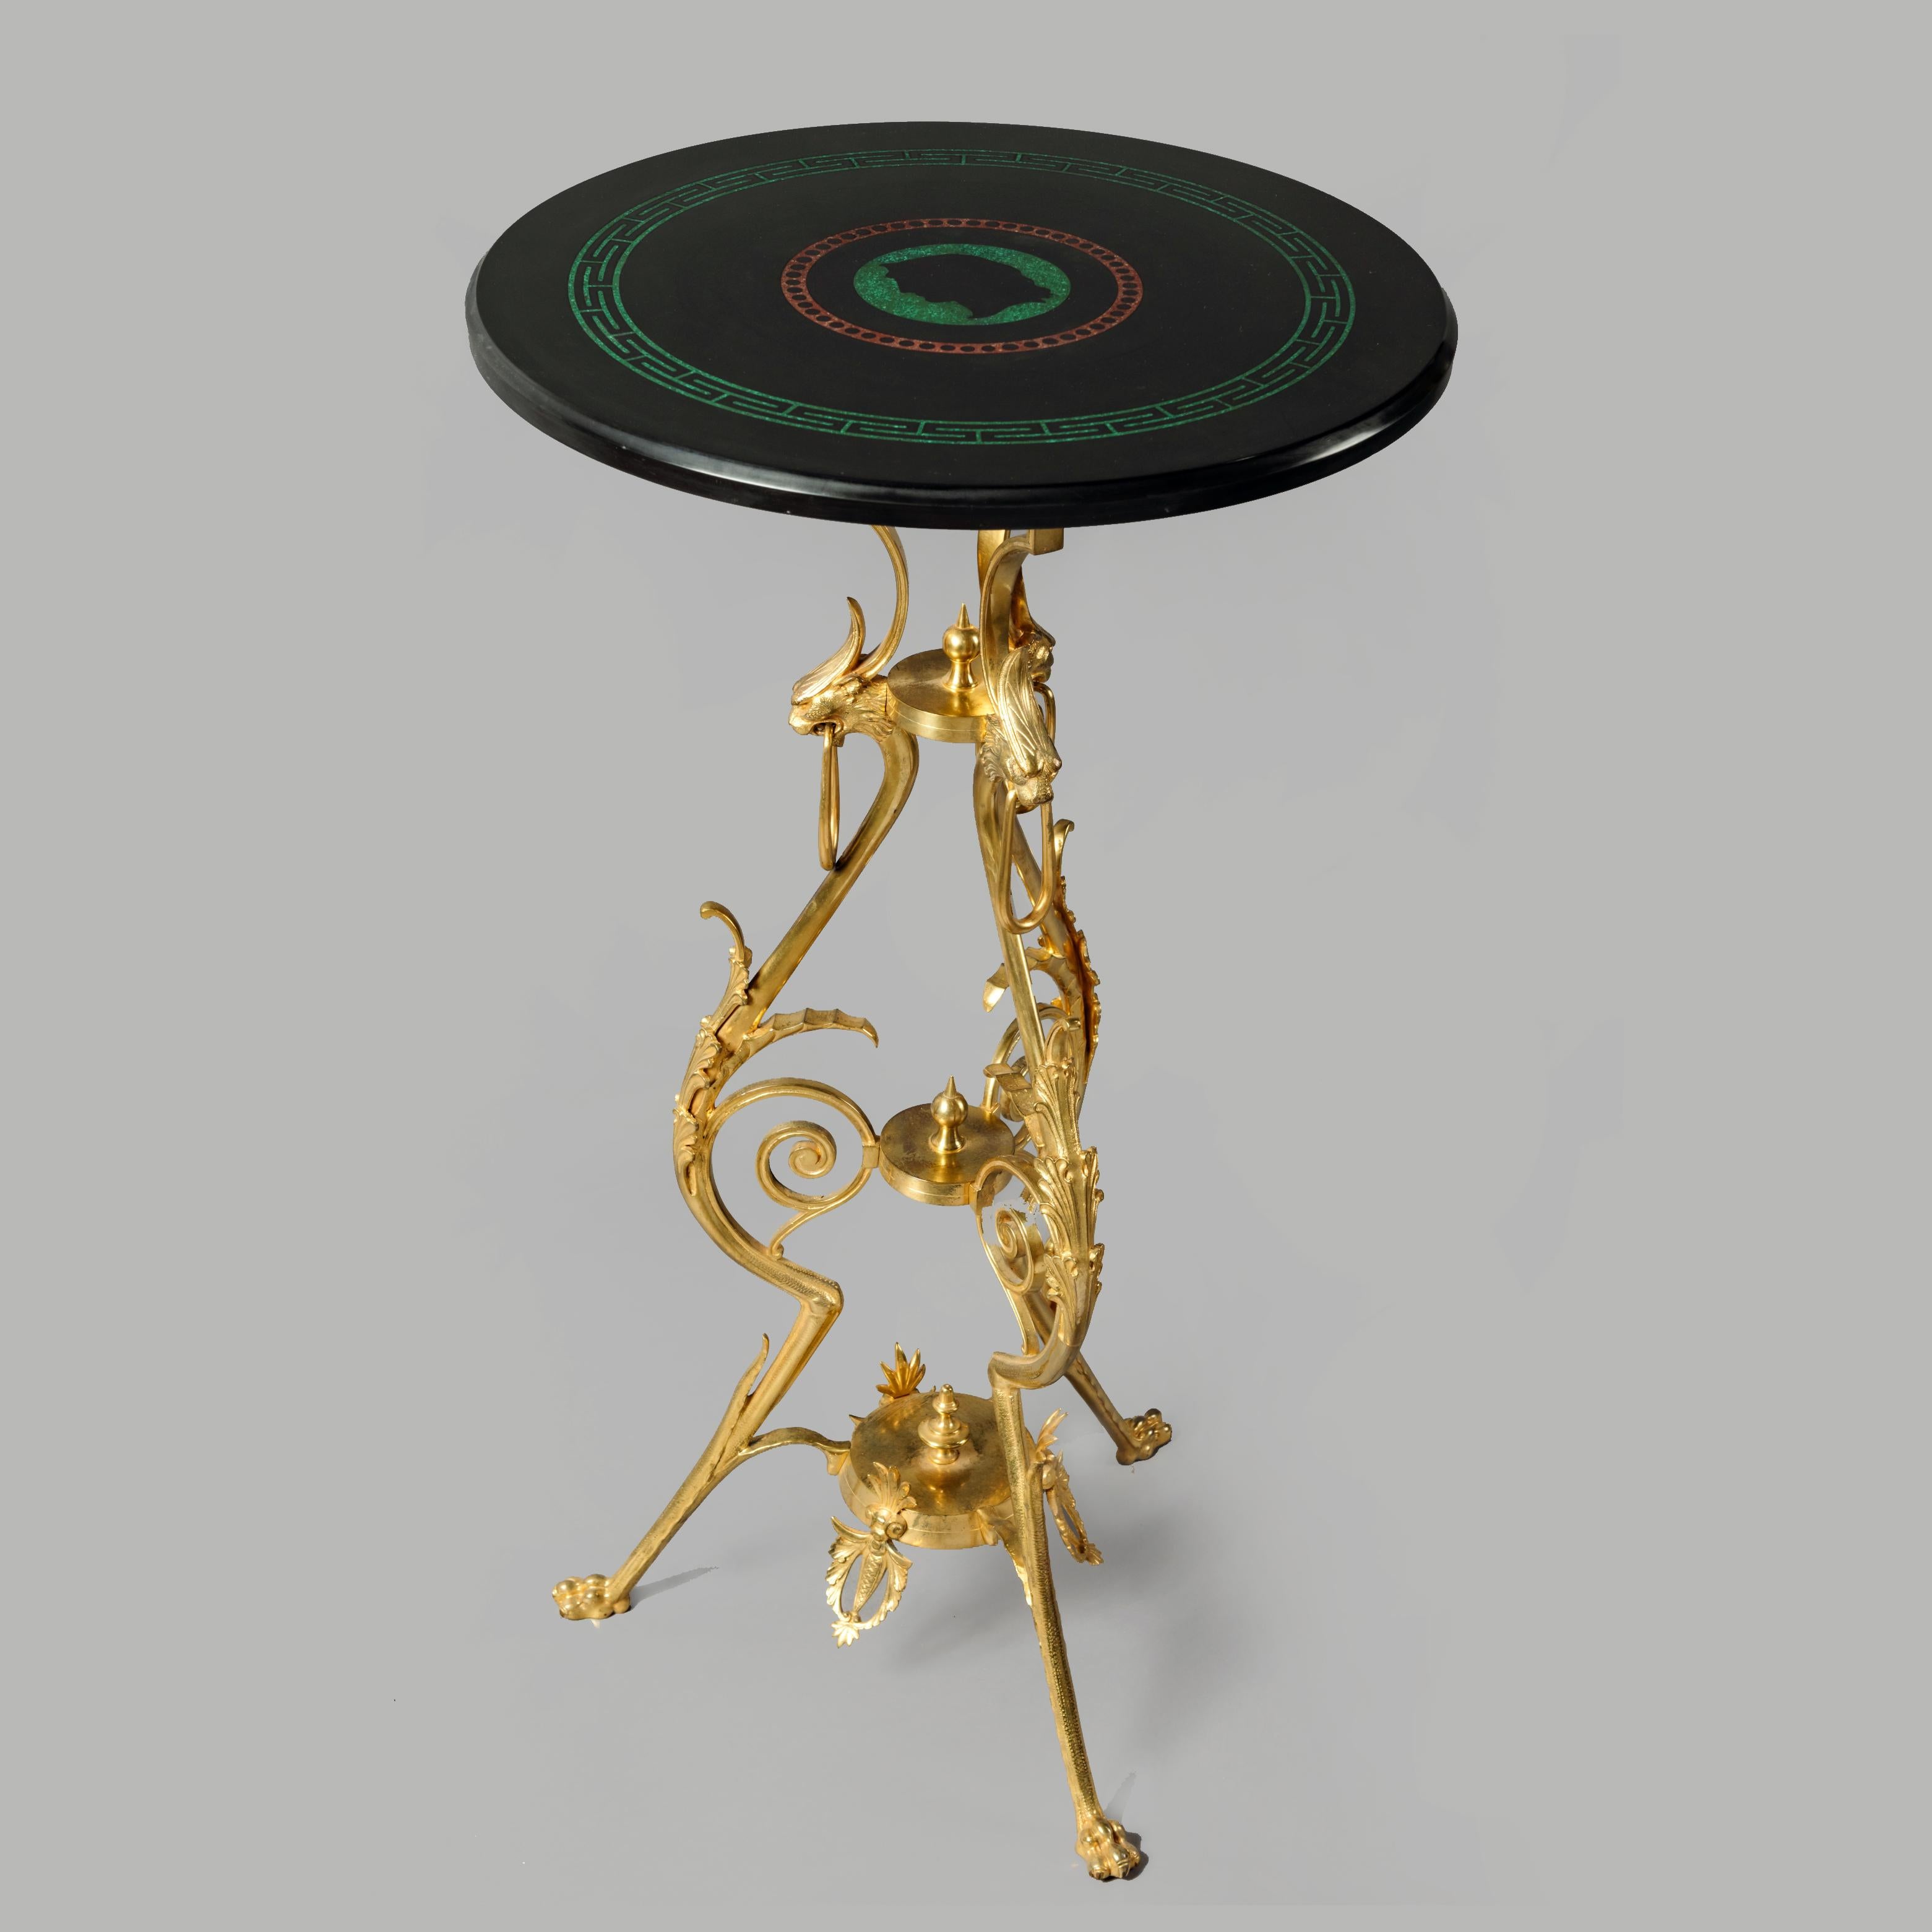 Neoclassical Revival Neoclassical Style Gilt-Bronze Gueridon Attributed to Ferdinand Barbedienne For Sale